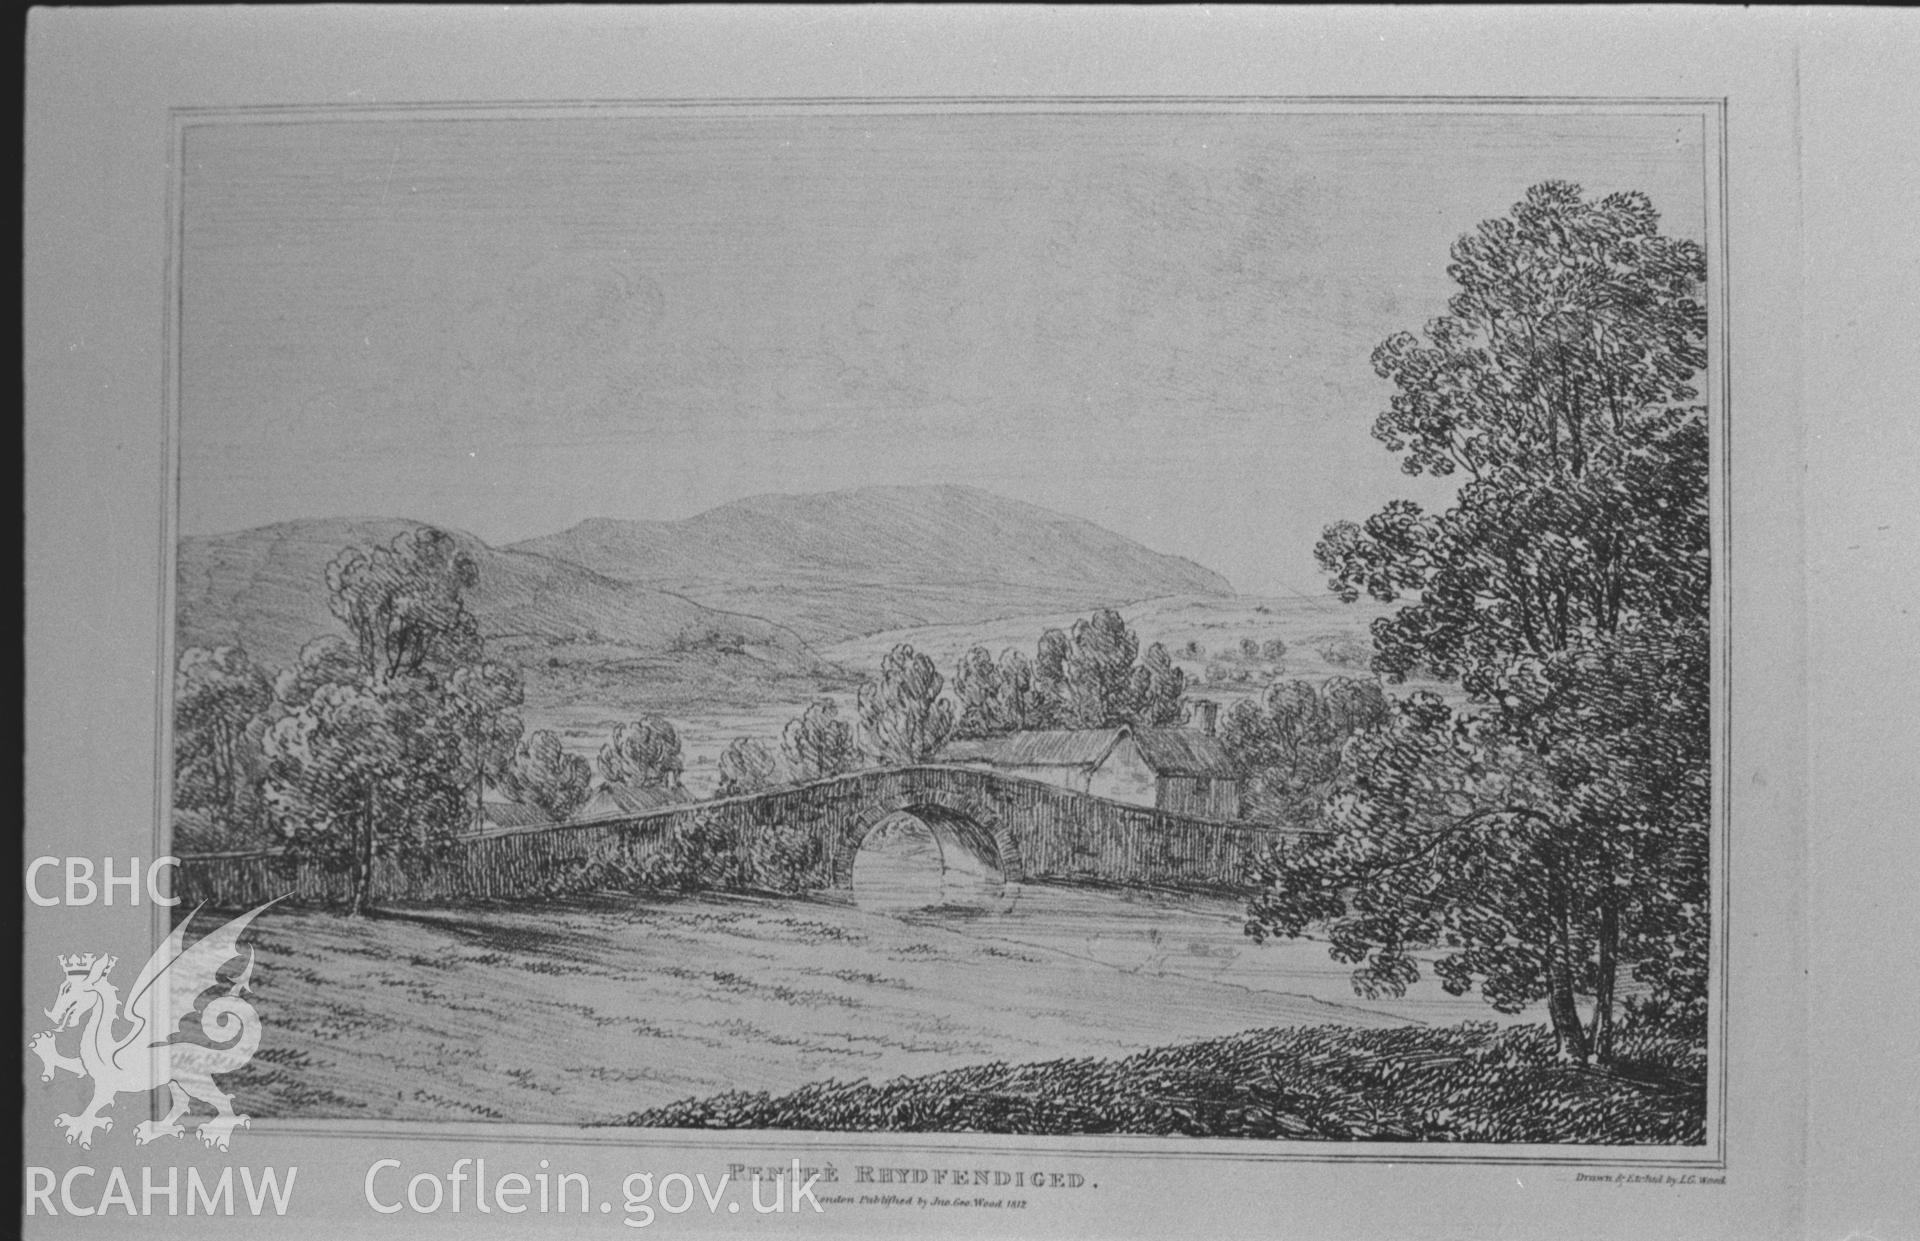 'Pentre Rhydfendiged' drawn and engraved by J. G. Woods, c.1810. Photographed by Arthur O. Chater in January 1968 for his own private research.